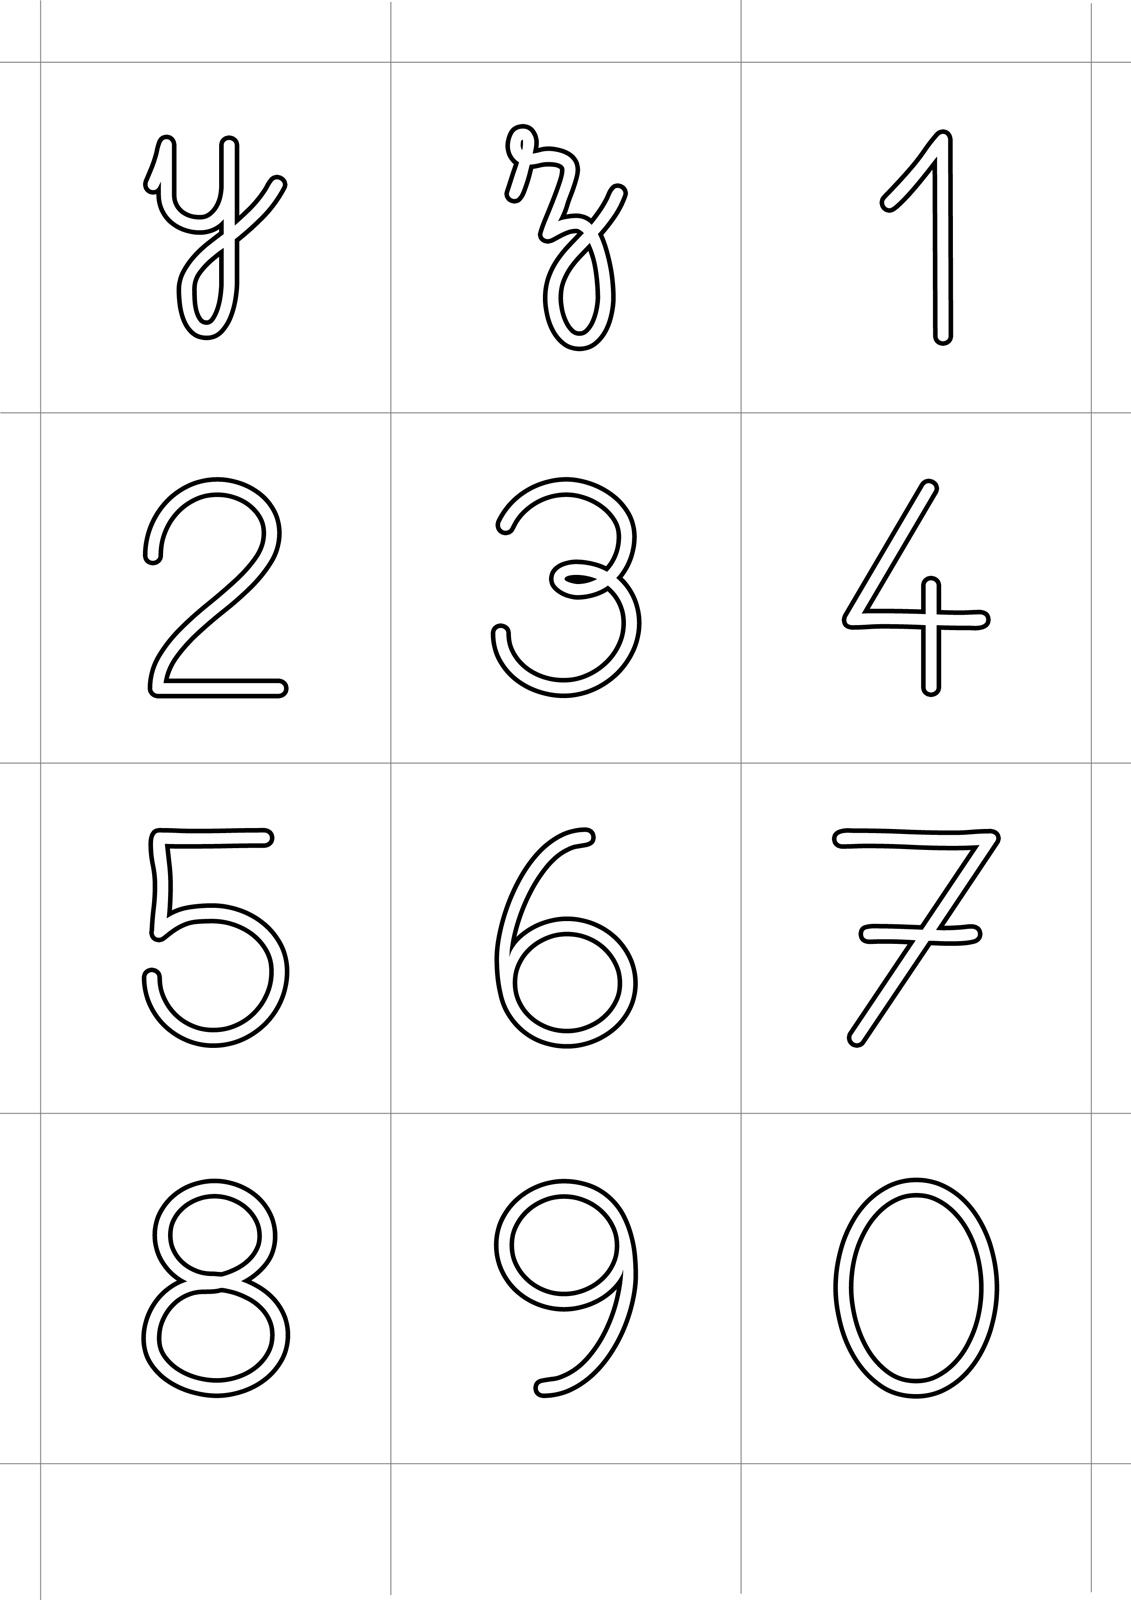 Letters and numbers - Cursive lowercase letters y - z and numbers from 0 to 9